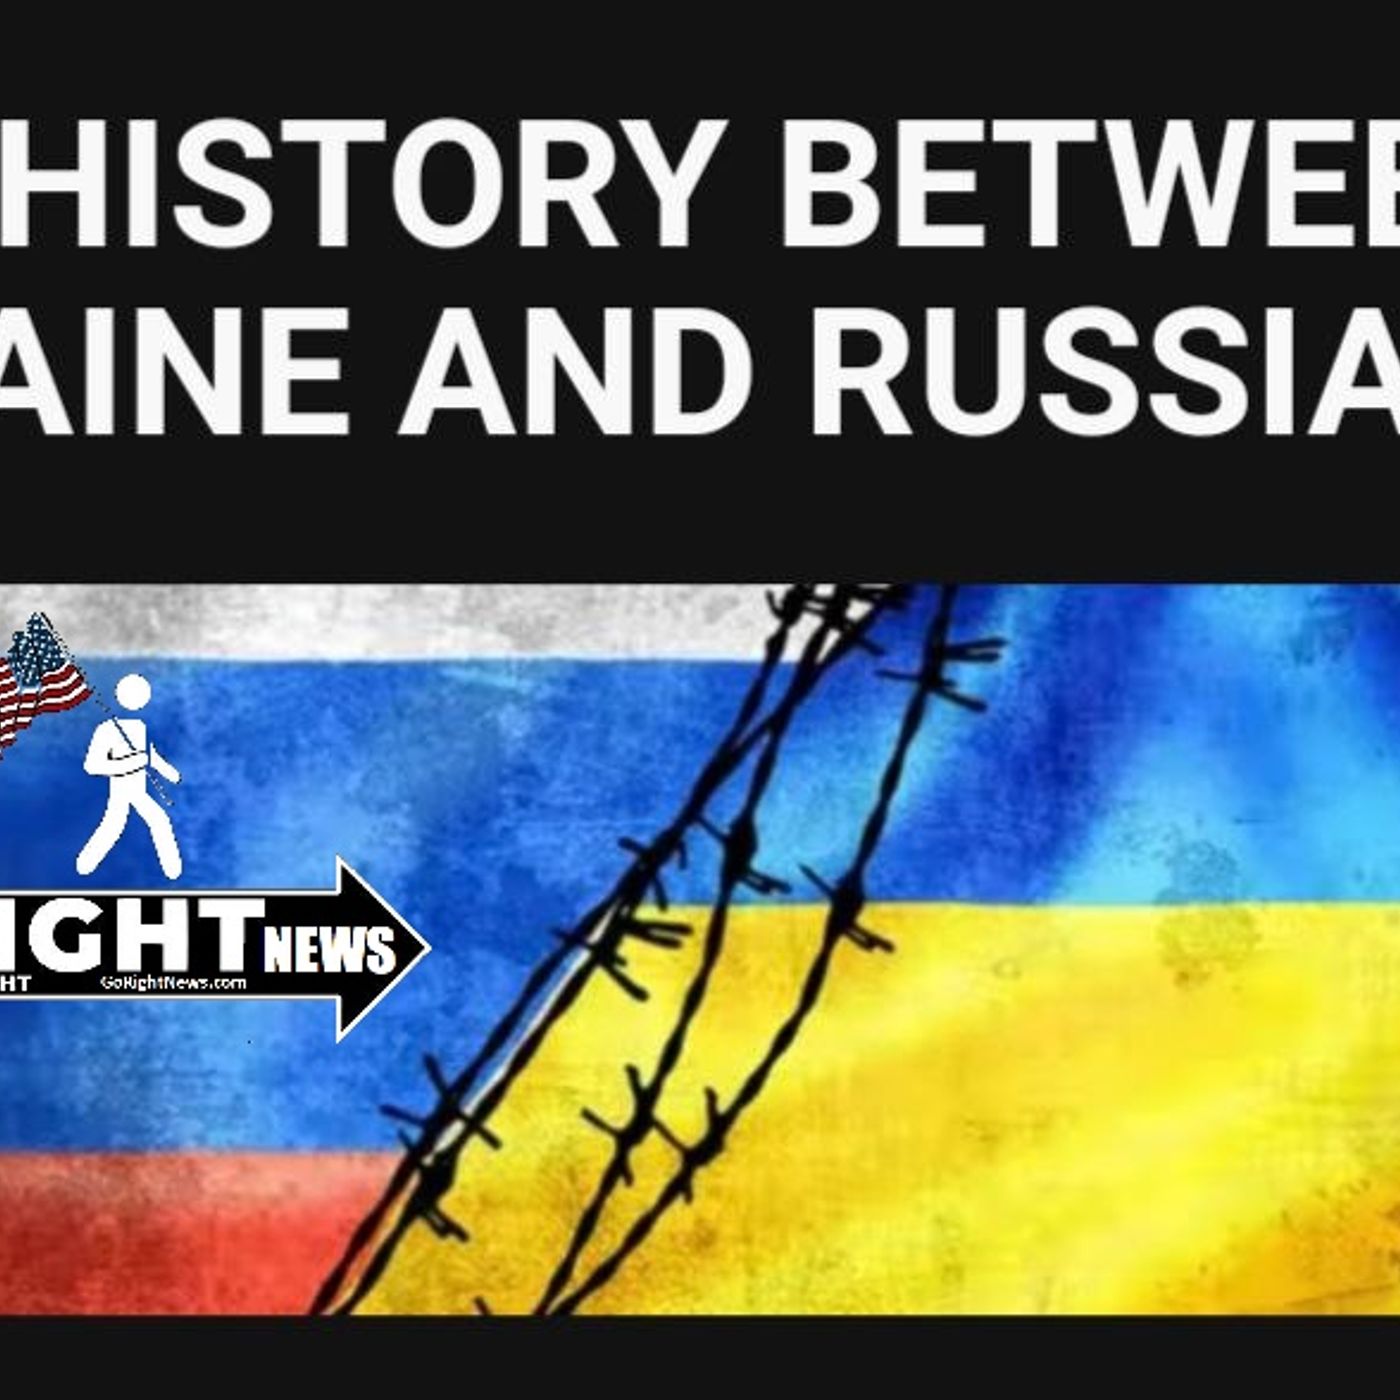 THE HISTORY BETWEEN UKRAINE AND RUSSIA